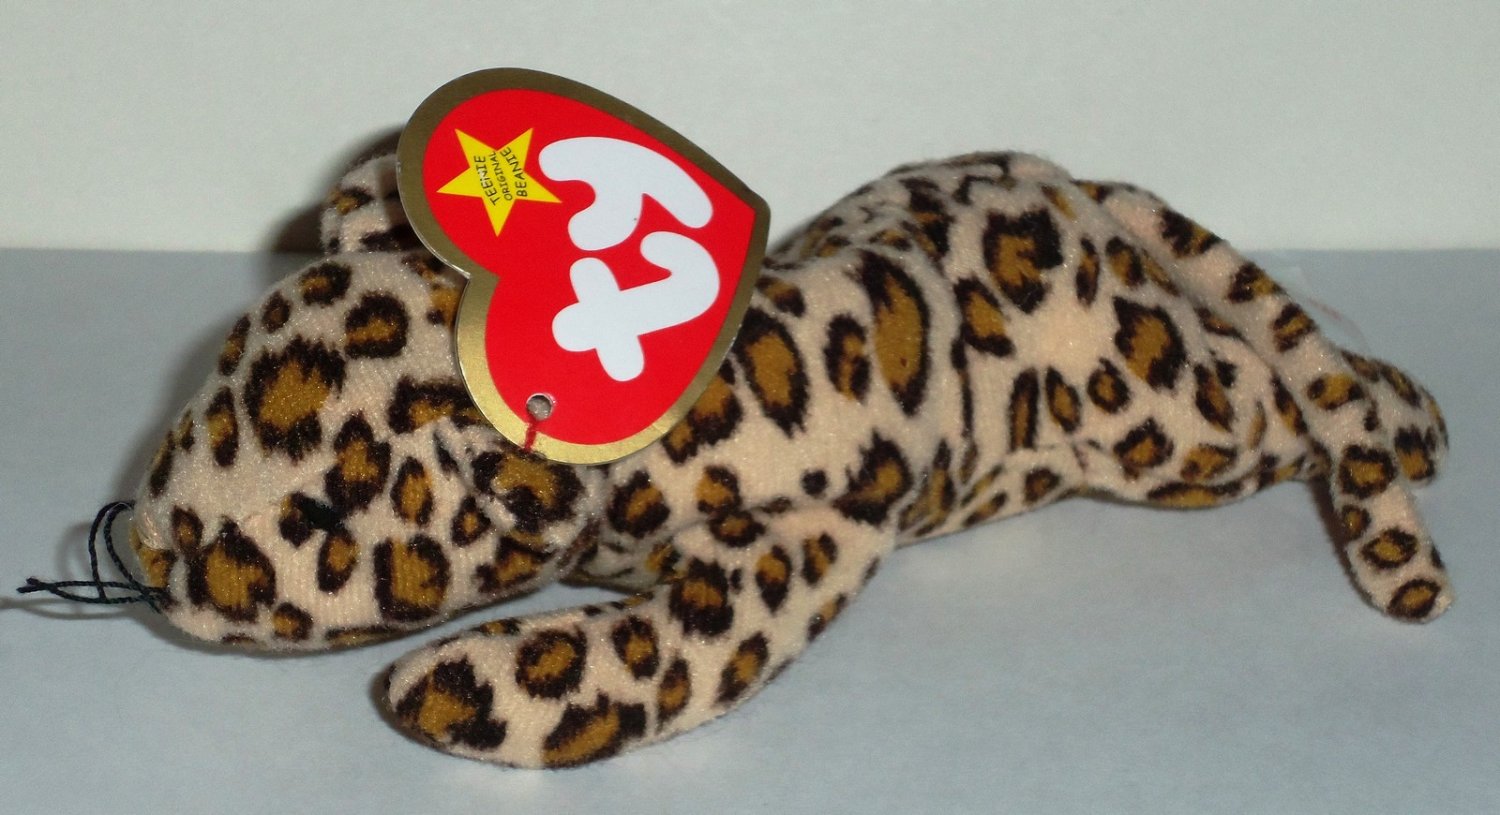 Details about   TY Beanie Babies Freckles The Leopard #1 1999 McDonalds Happy Meal Plush in Bag 